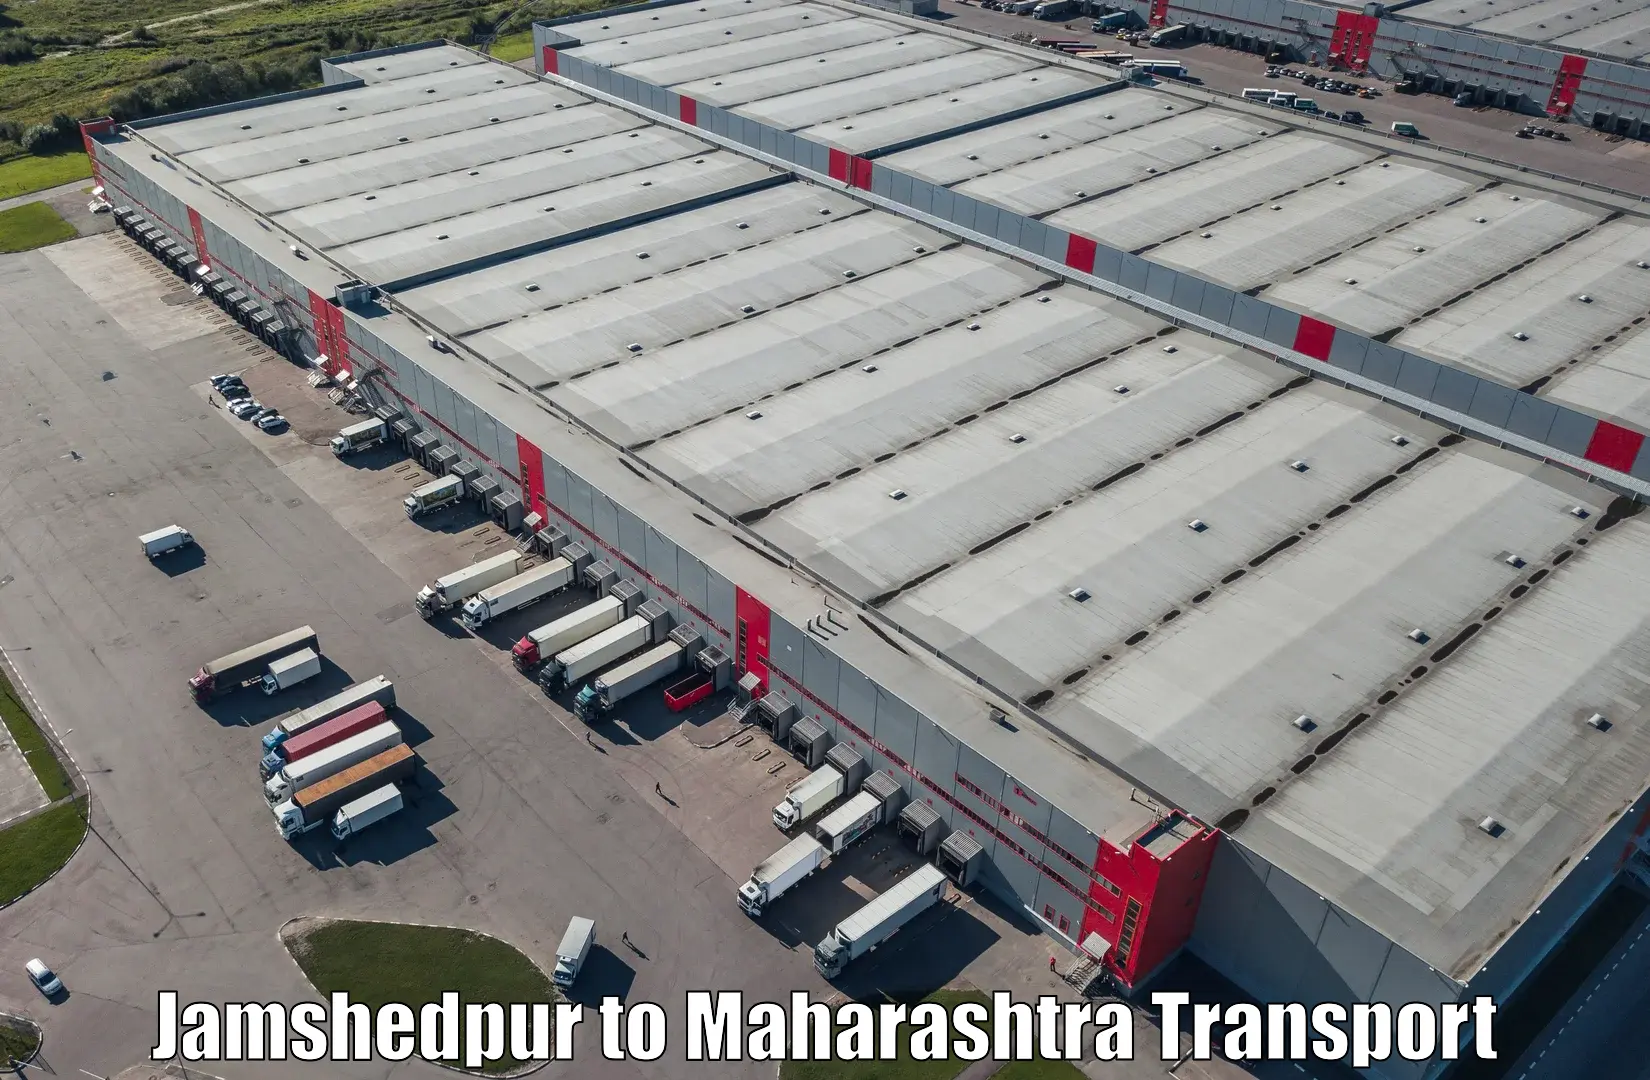 Air freight transport services Jamshedpur to Shirdi